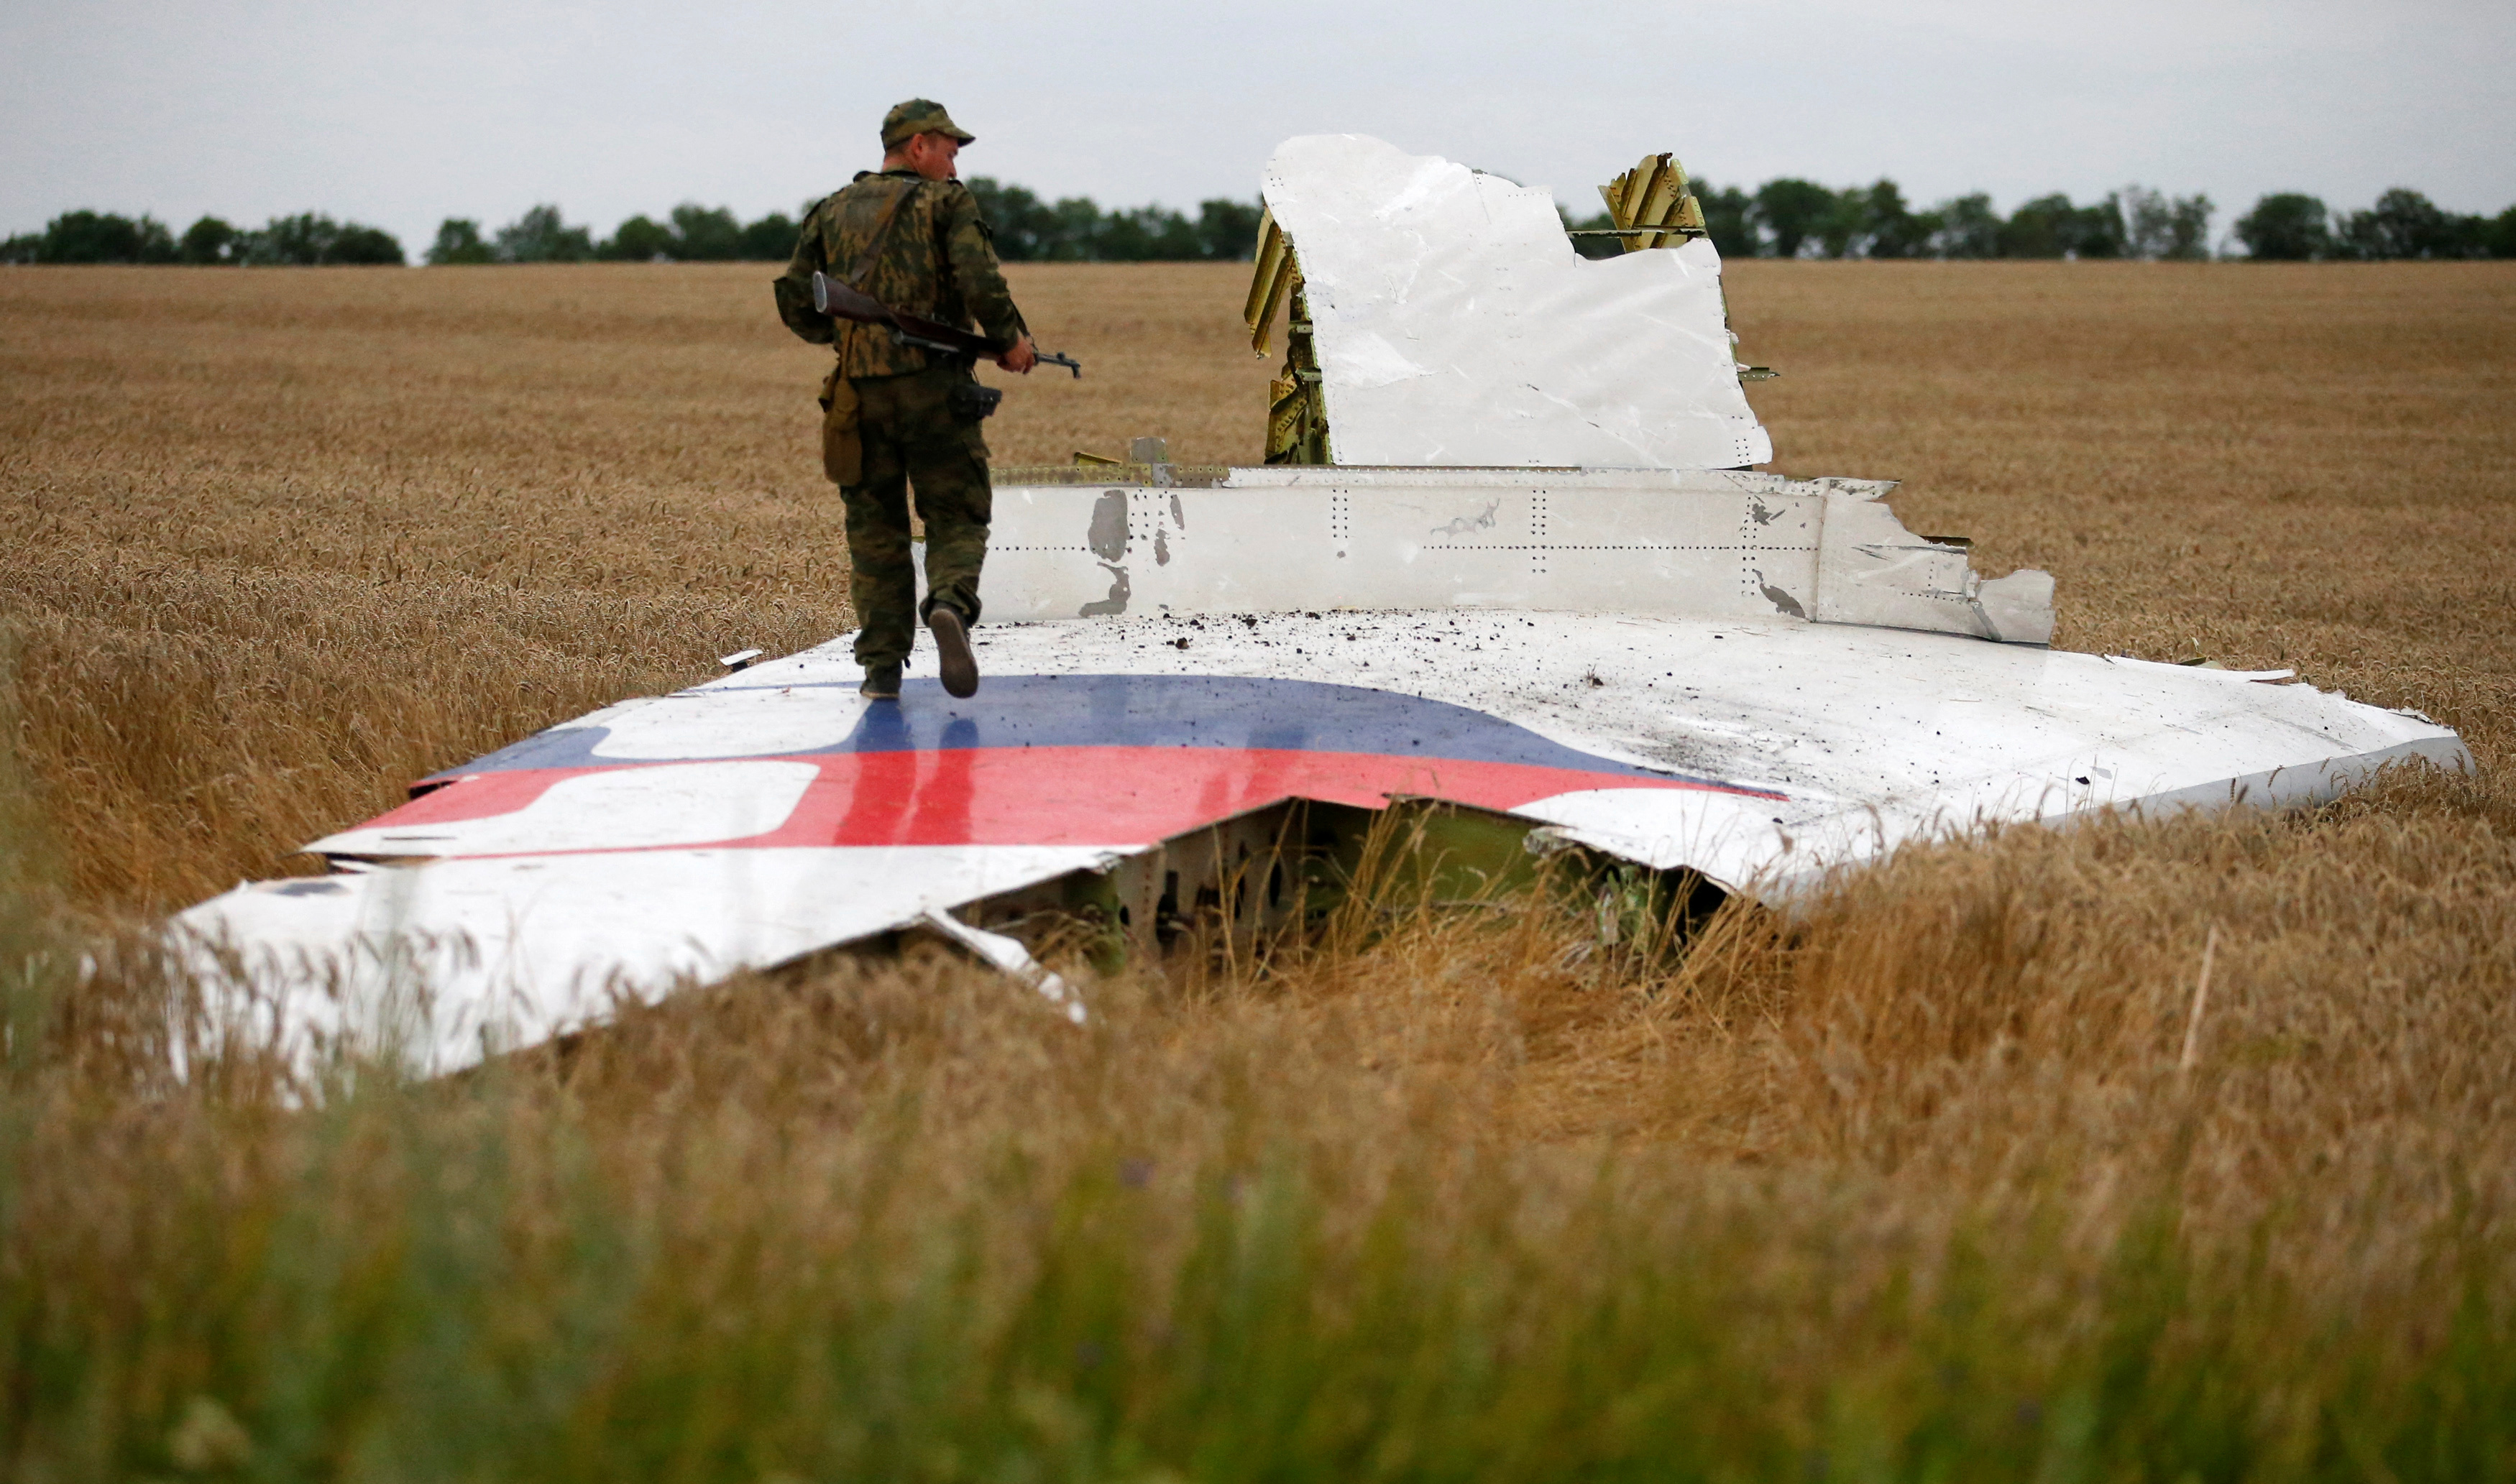 An armed pro-Russian separatist stands on part of the wreckage of the Malaysia Airlines Boeing 777 plane after it crashed near the settlement of Grabovo in the Donetsk region